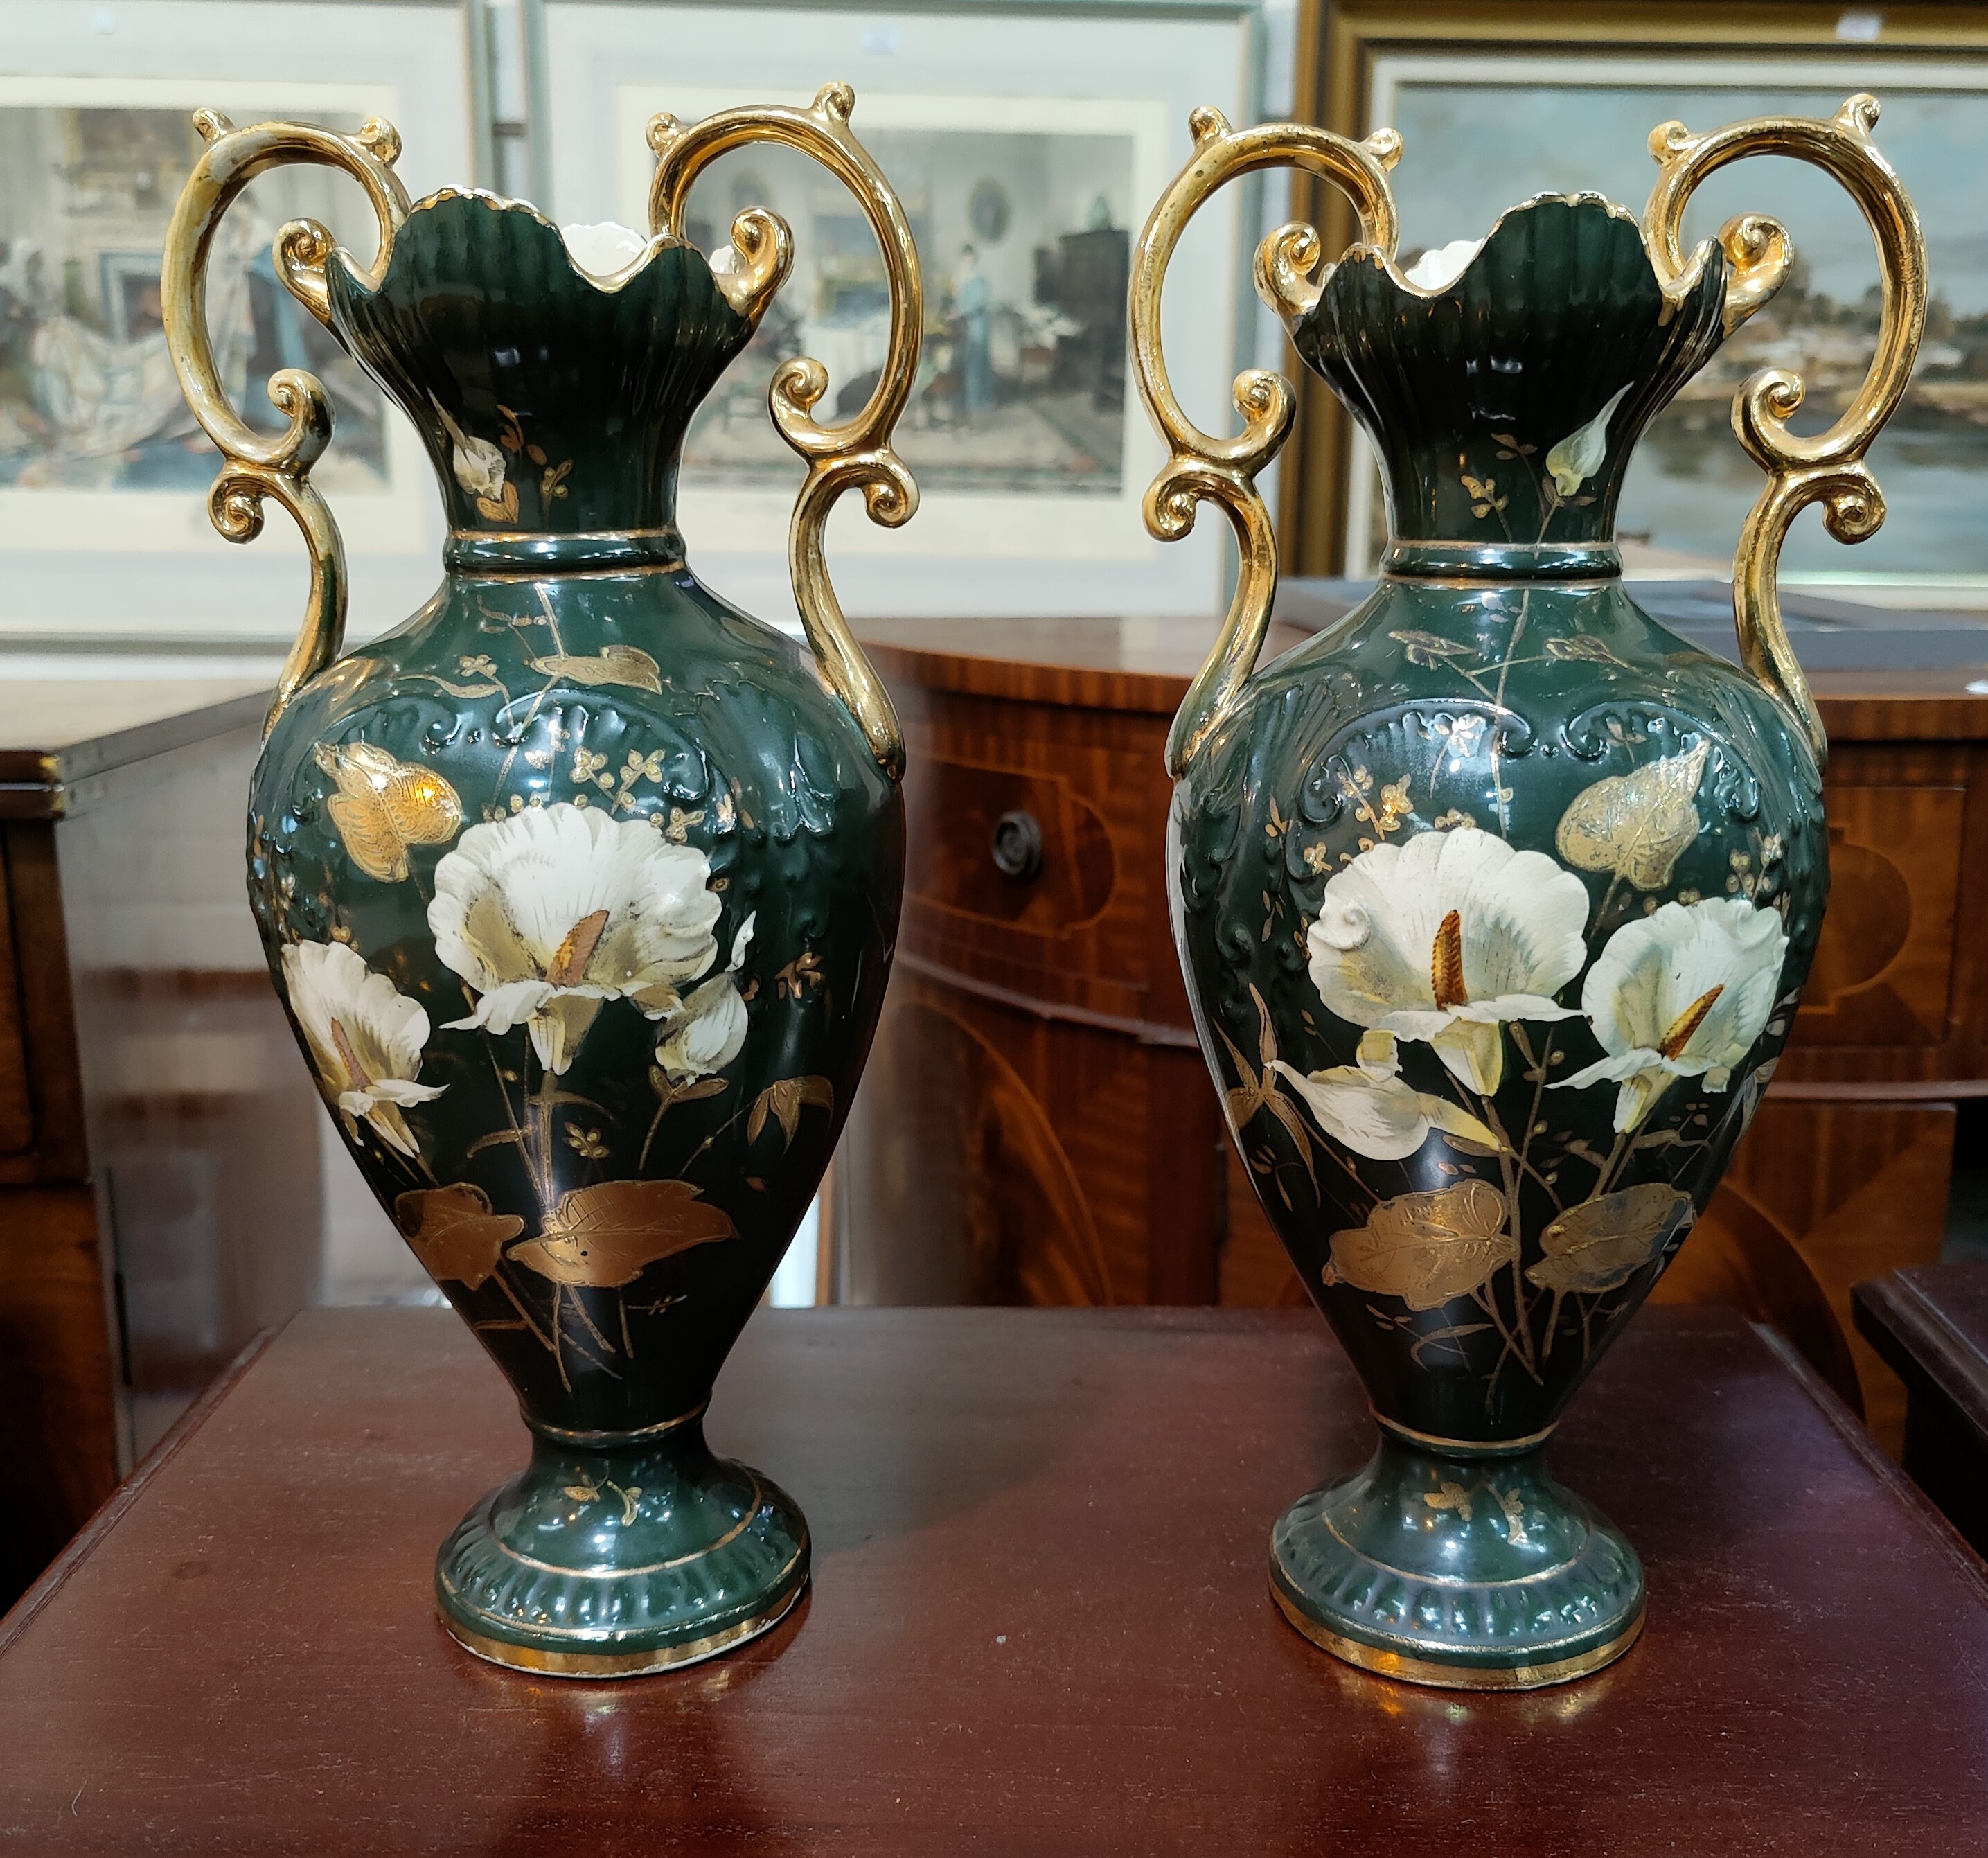 A pair of Victorian style decorative vases